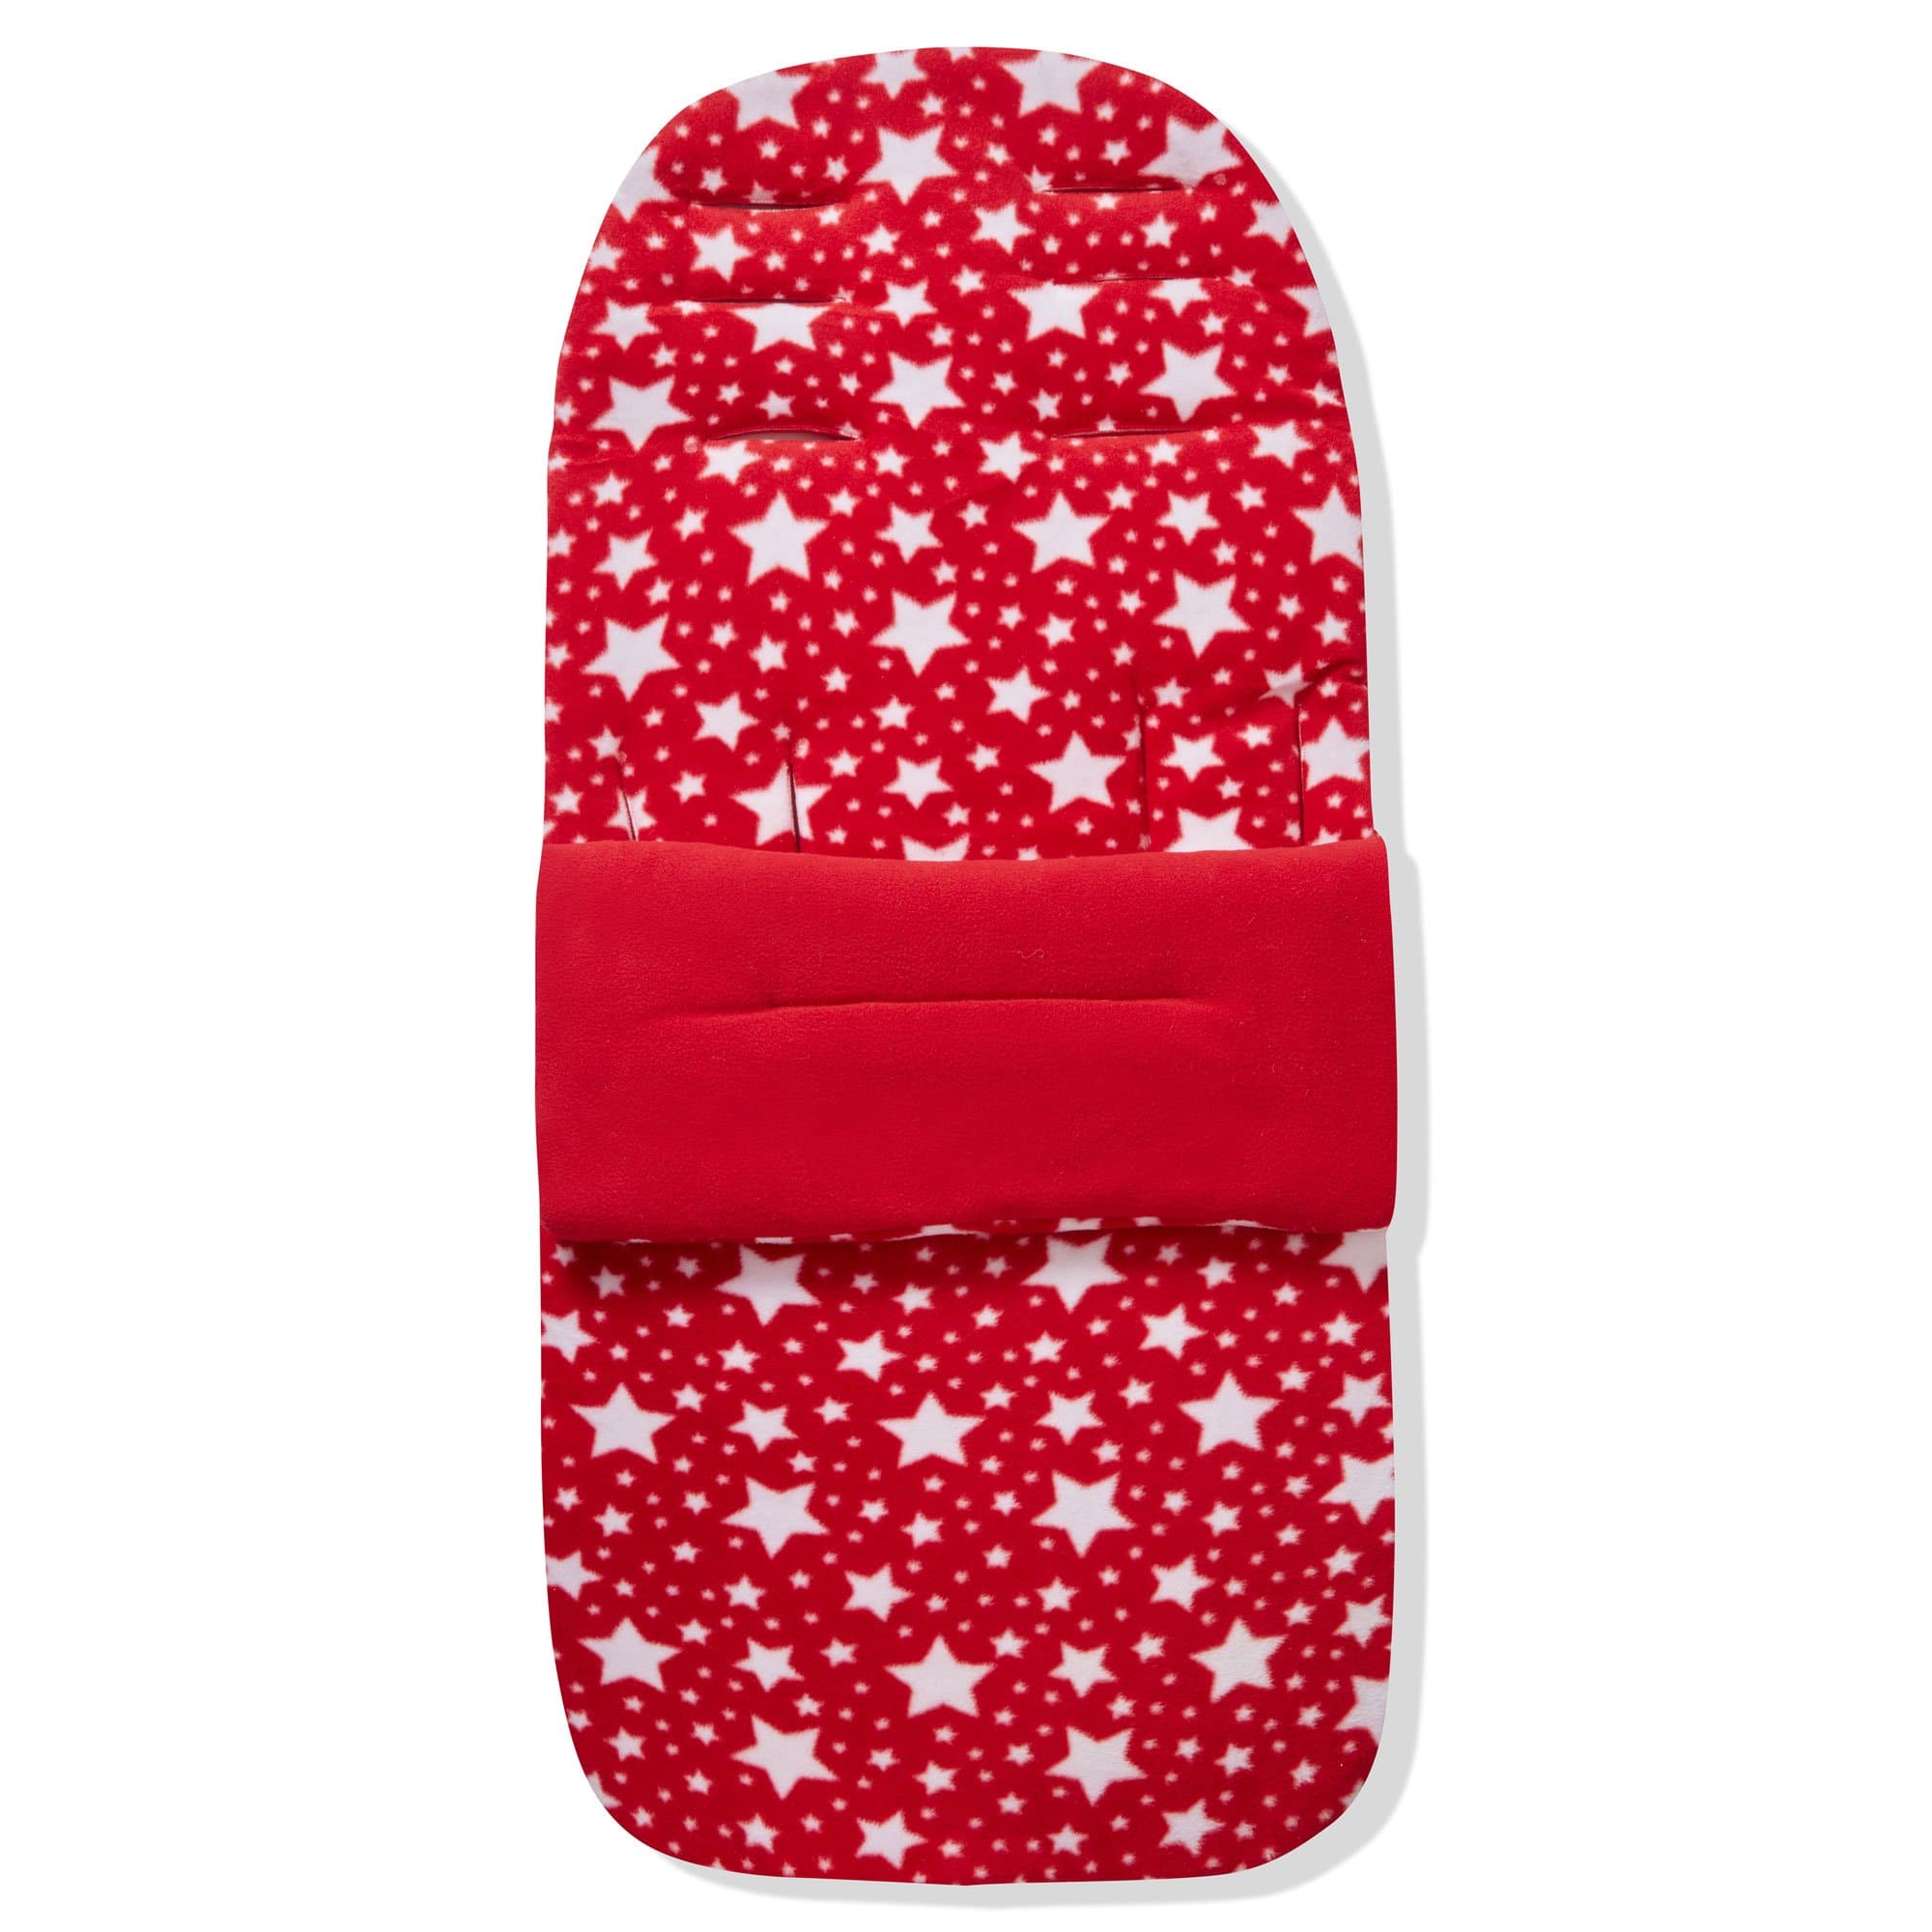 Fleece Footmuff / Cosy Toes Compatible with Nuna - For Your Little One